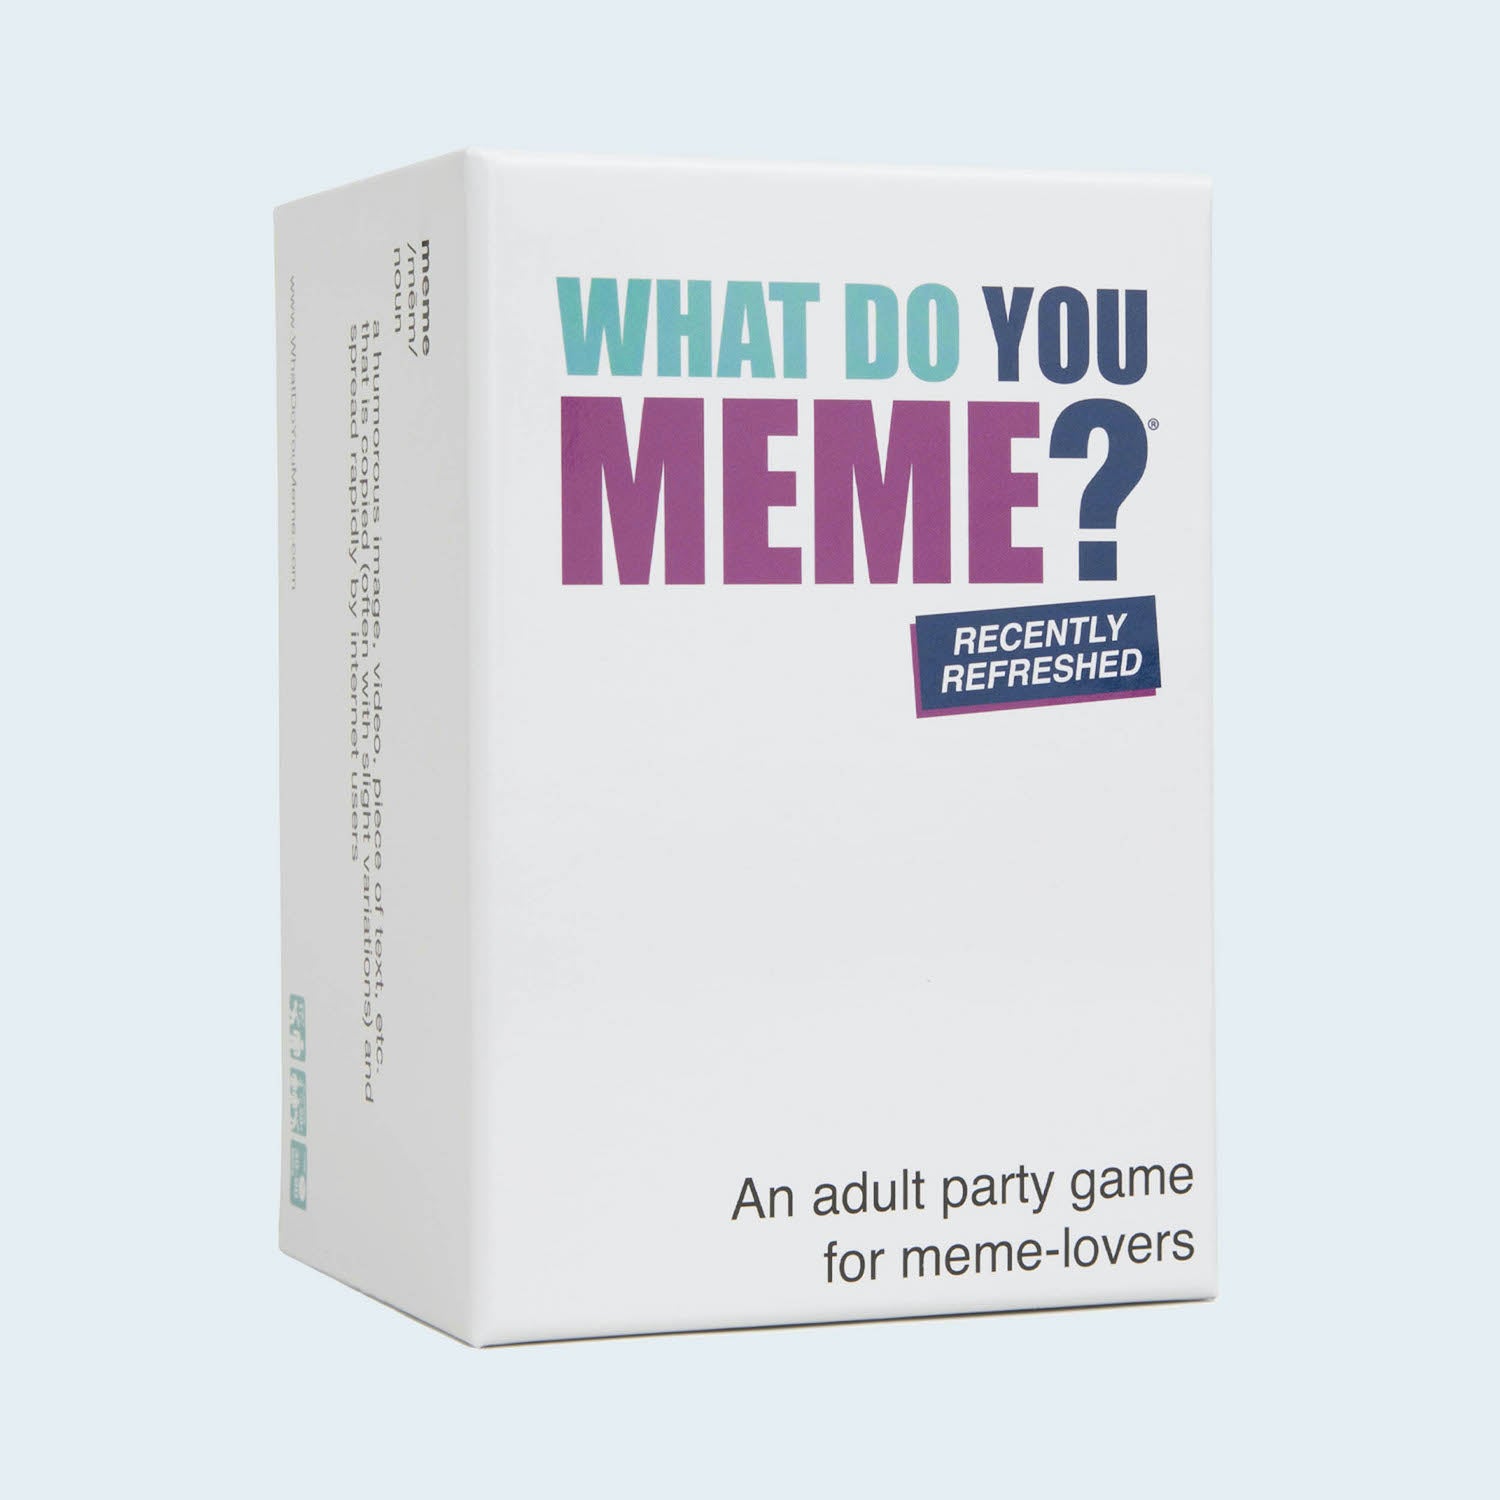  WHAT DO YOU MEME? On The Go!